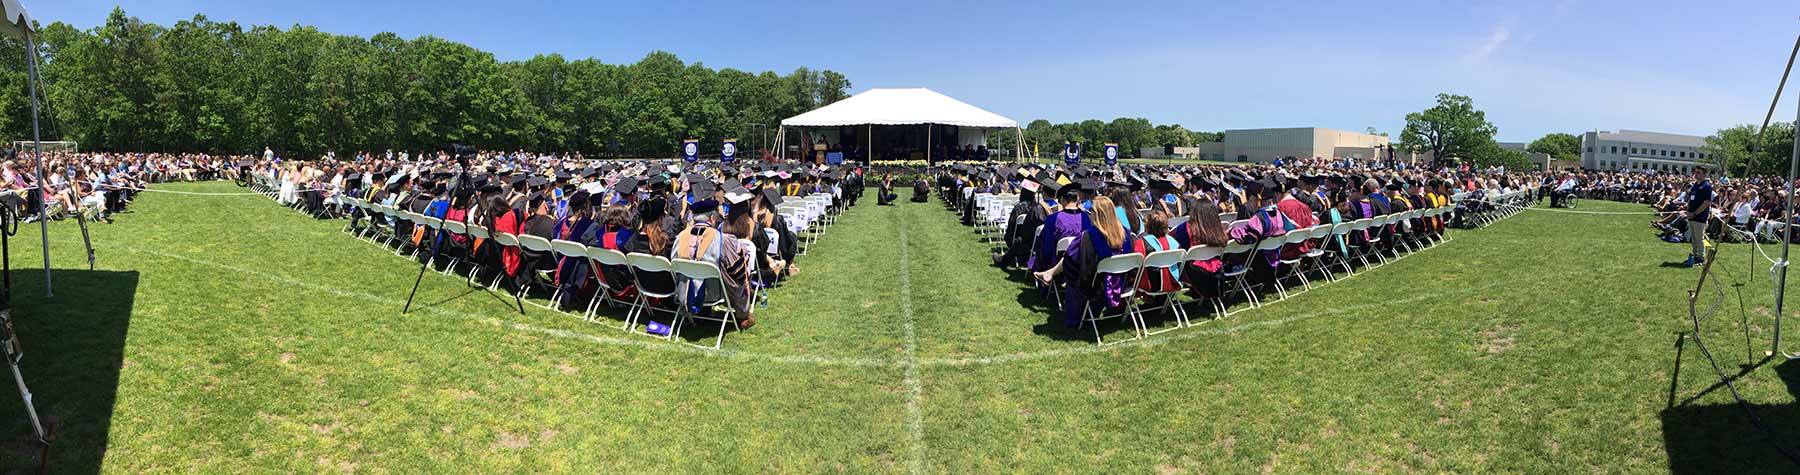 Students & Faculty sitting in white chairs at commencement